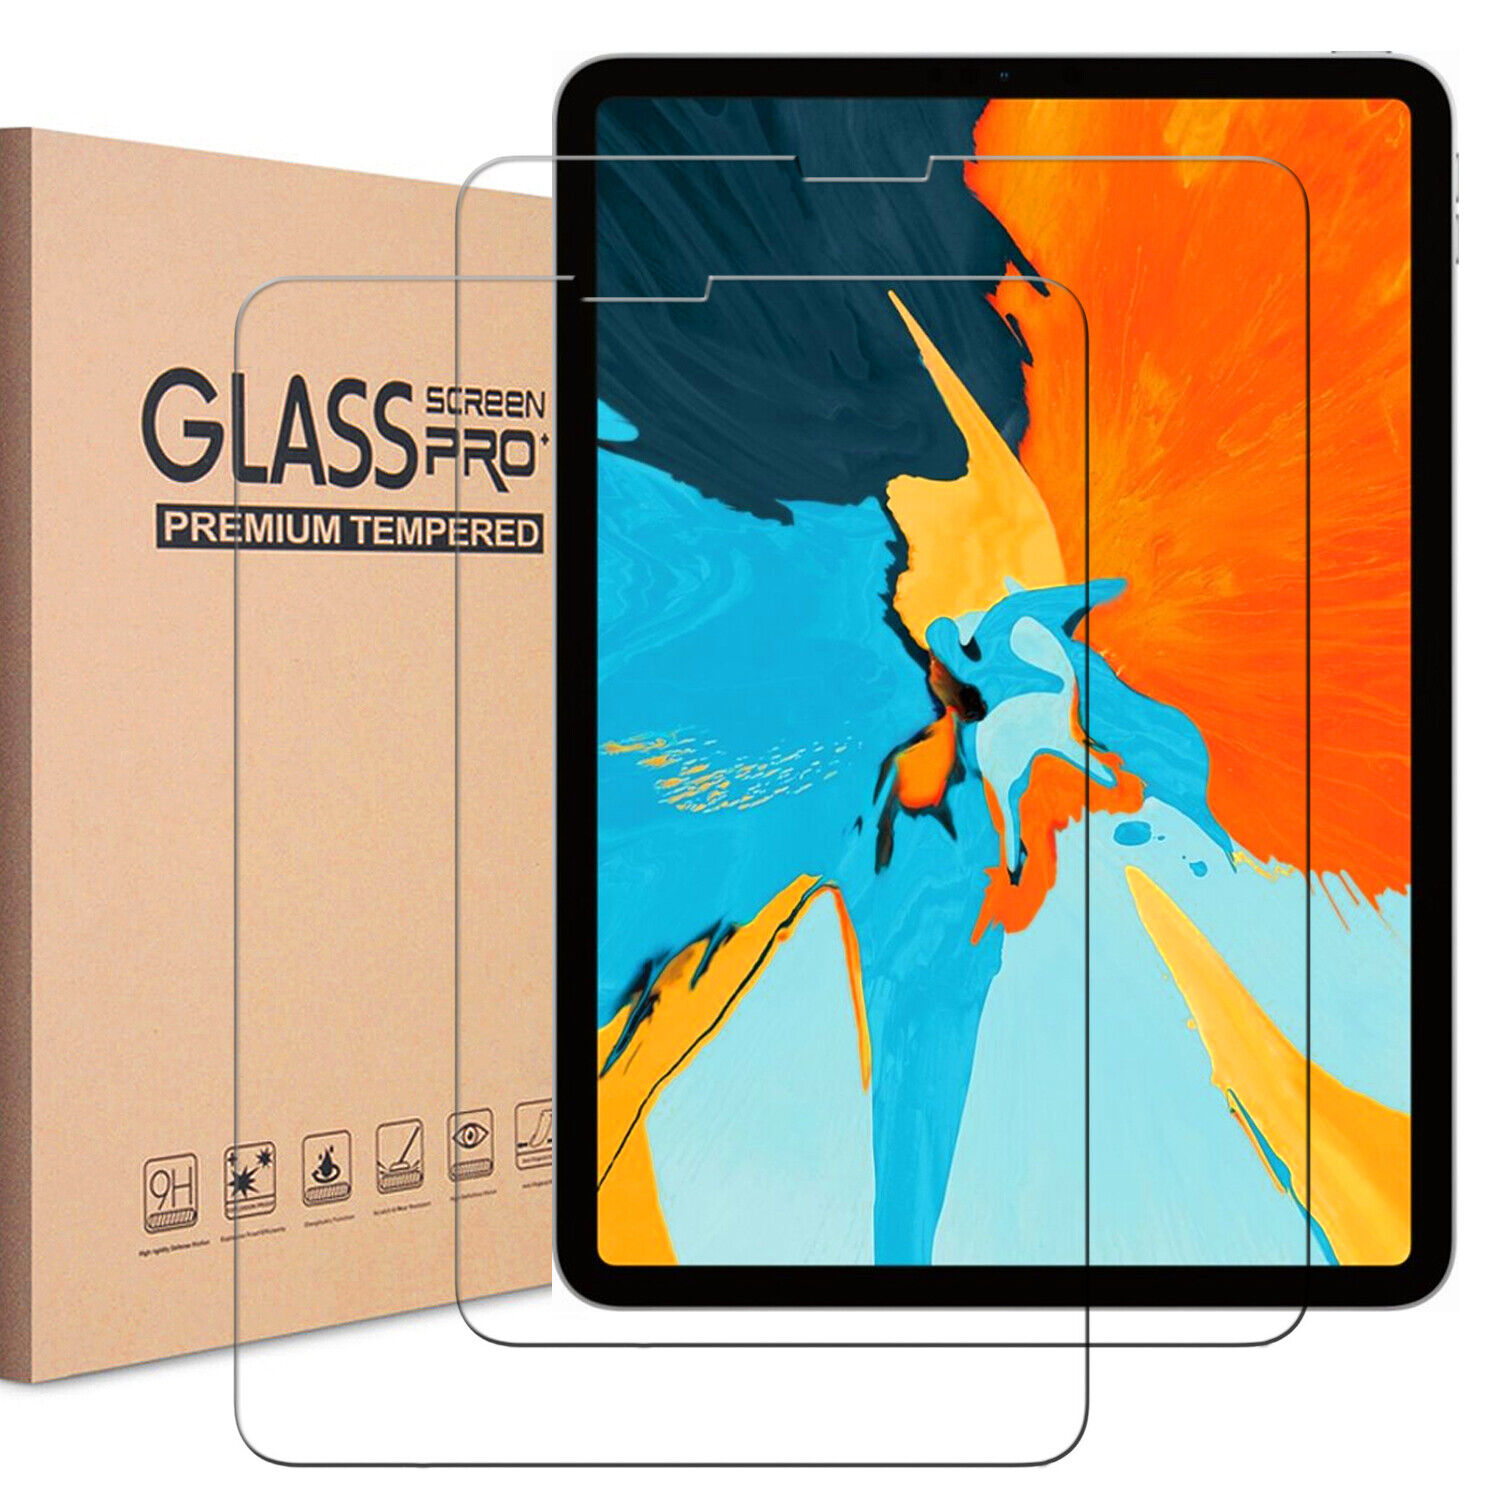 2x Tempered Glass Screen Protector For iPad 9.7 10.2 10.9 7th 5th 6 Mini Air Pro KIQ Does Not Apply